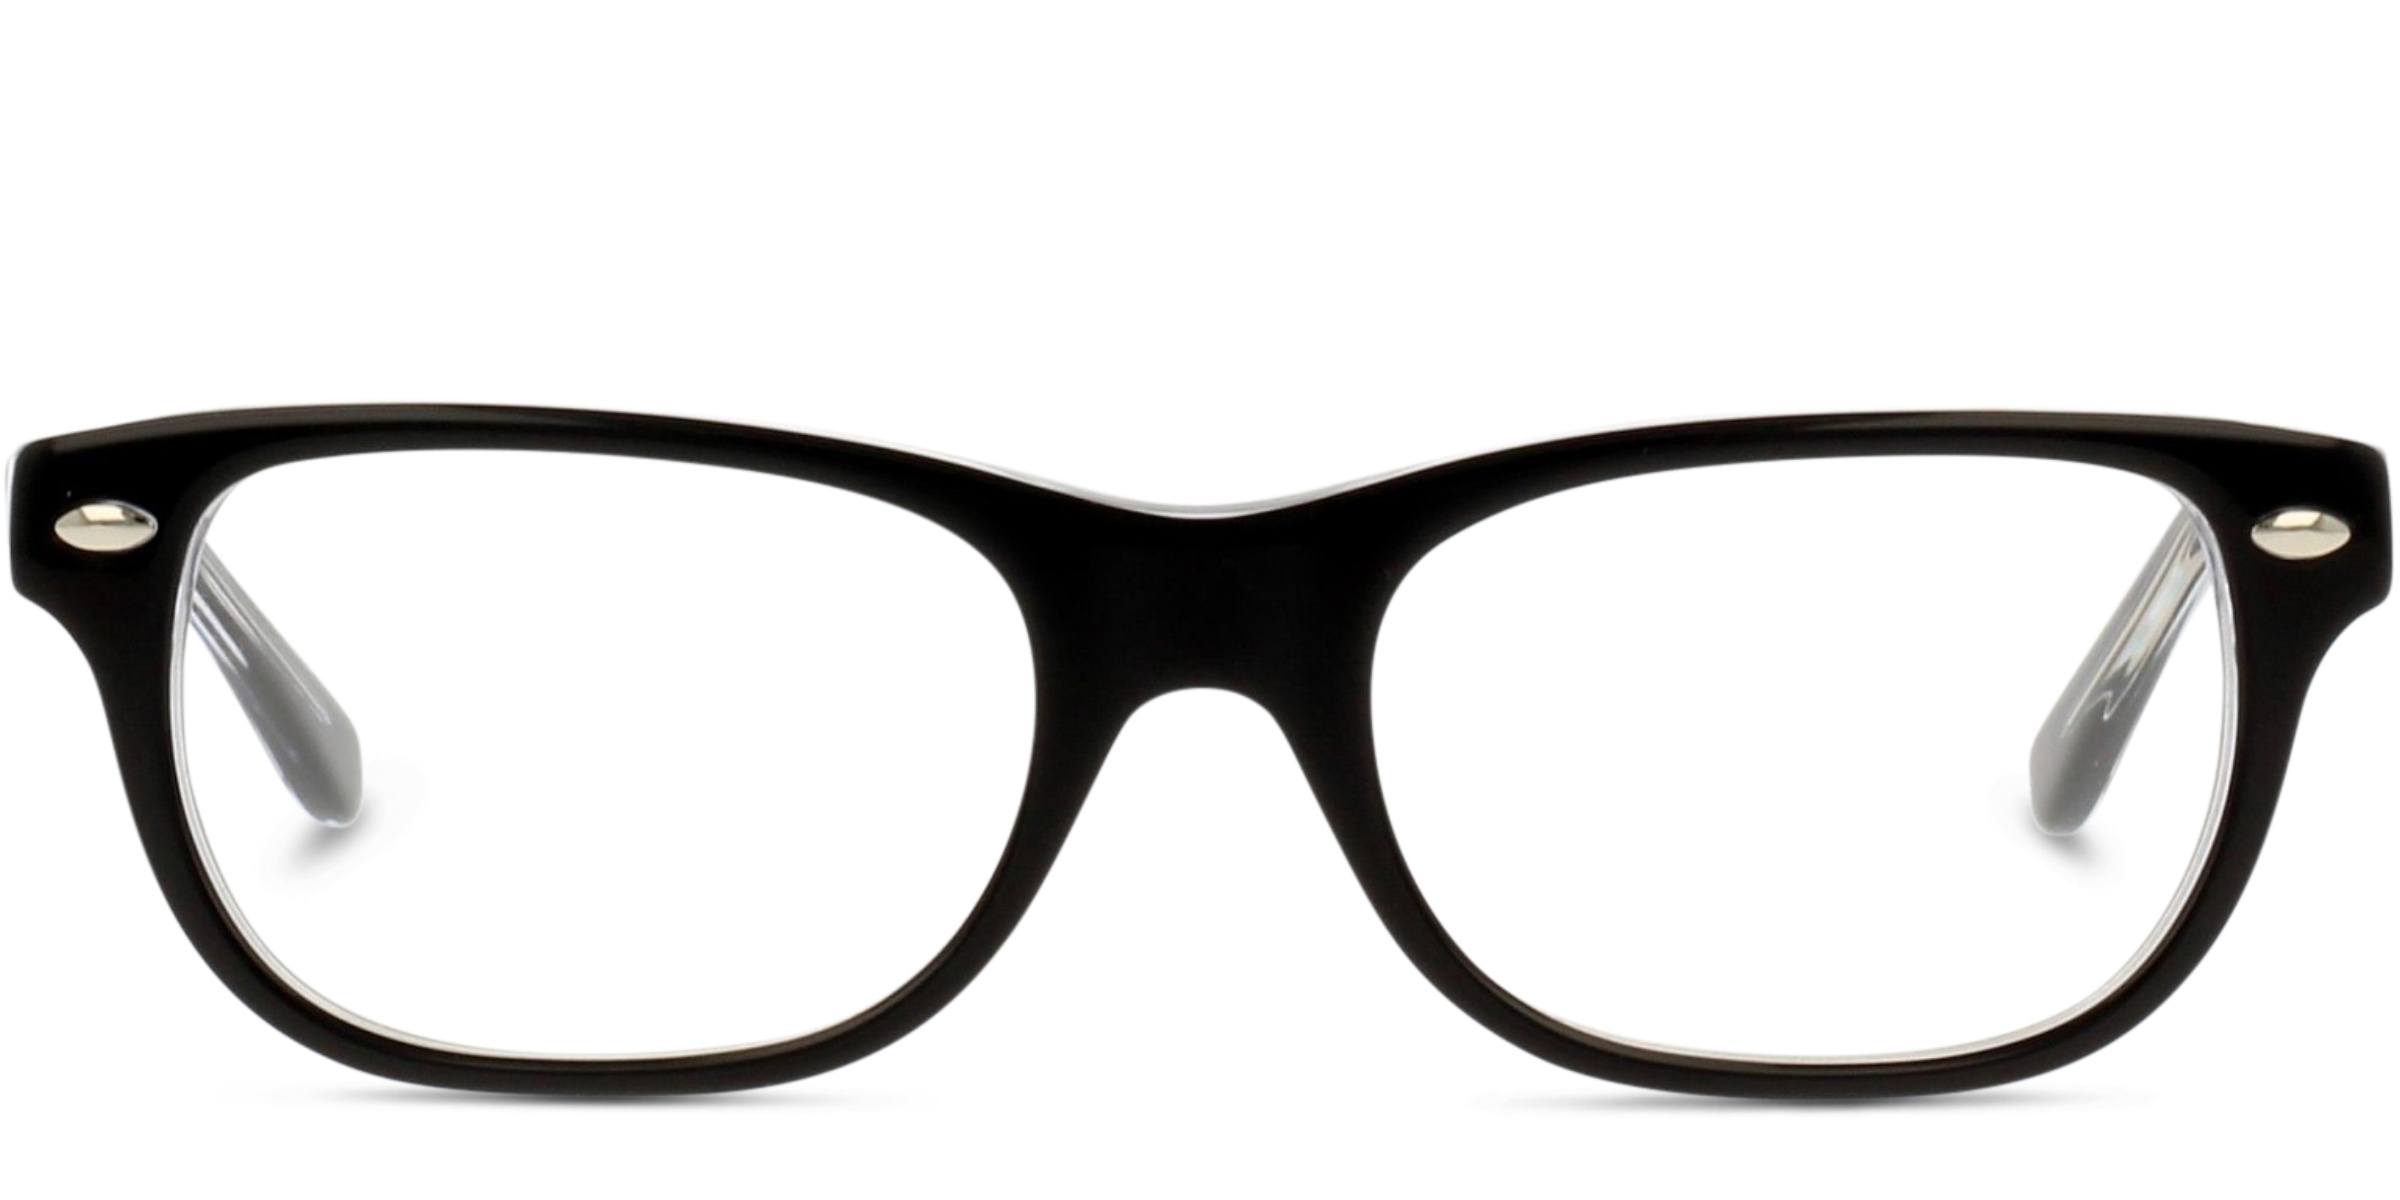 Ray-Ban RY1555 eyeglasses for kids in Black on Transparent